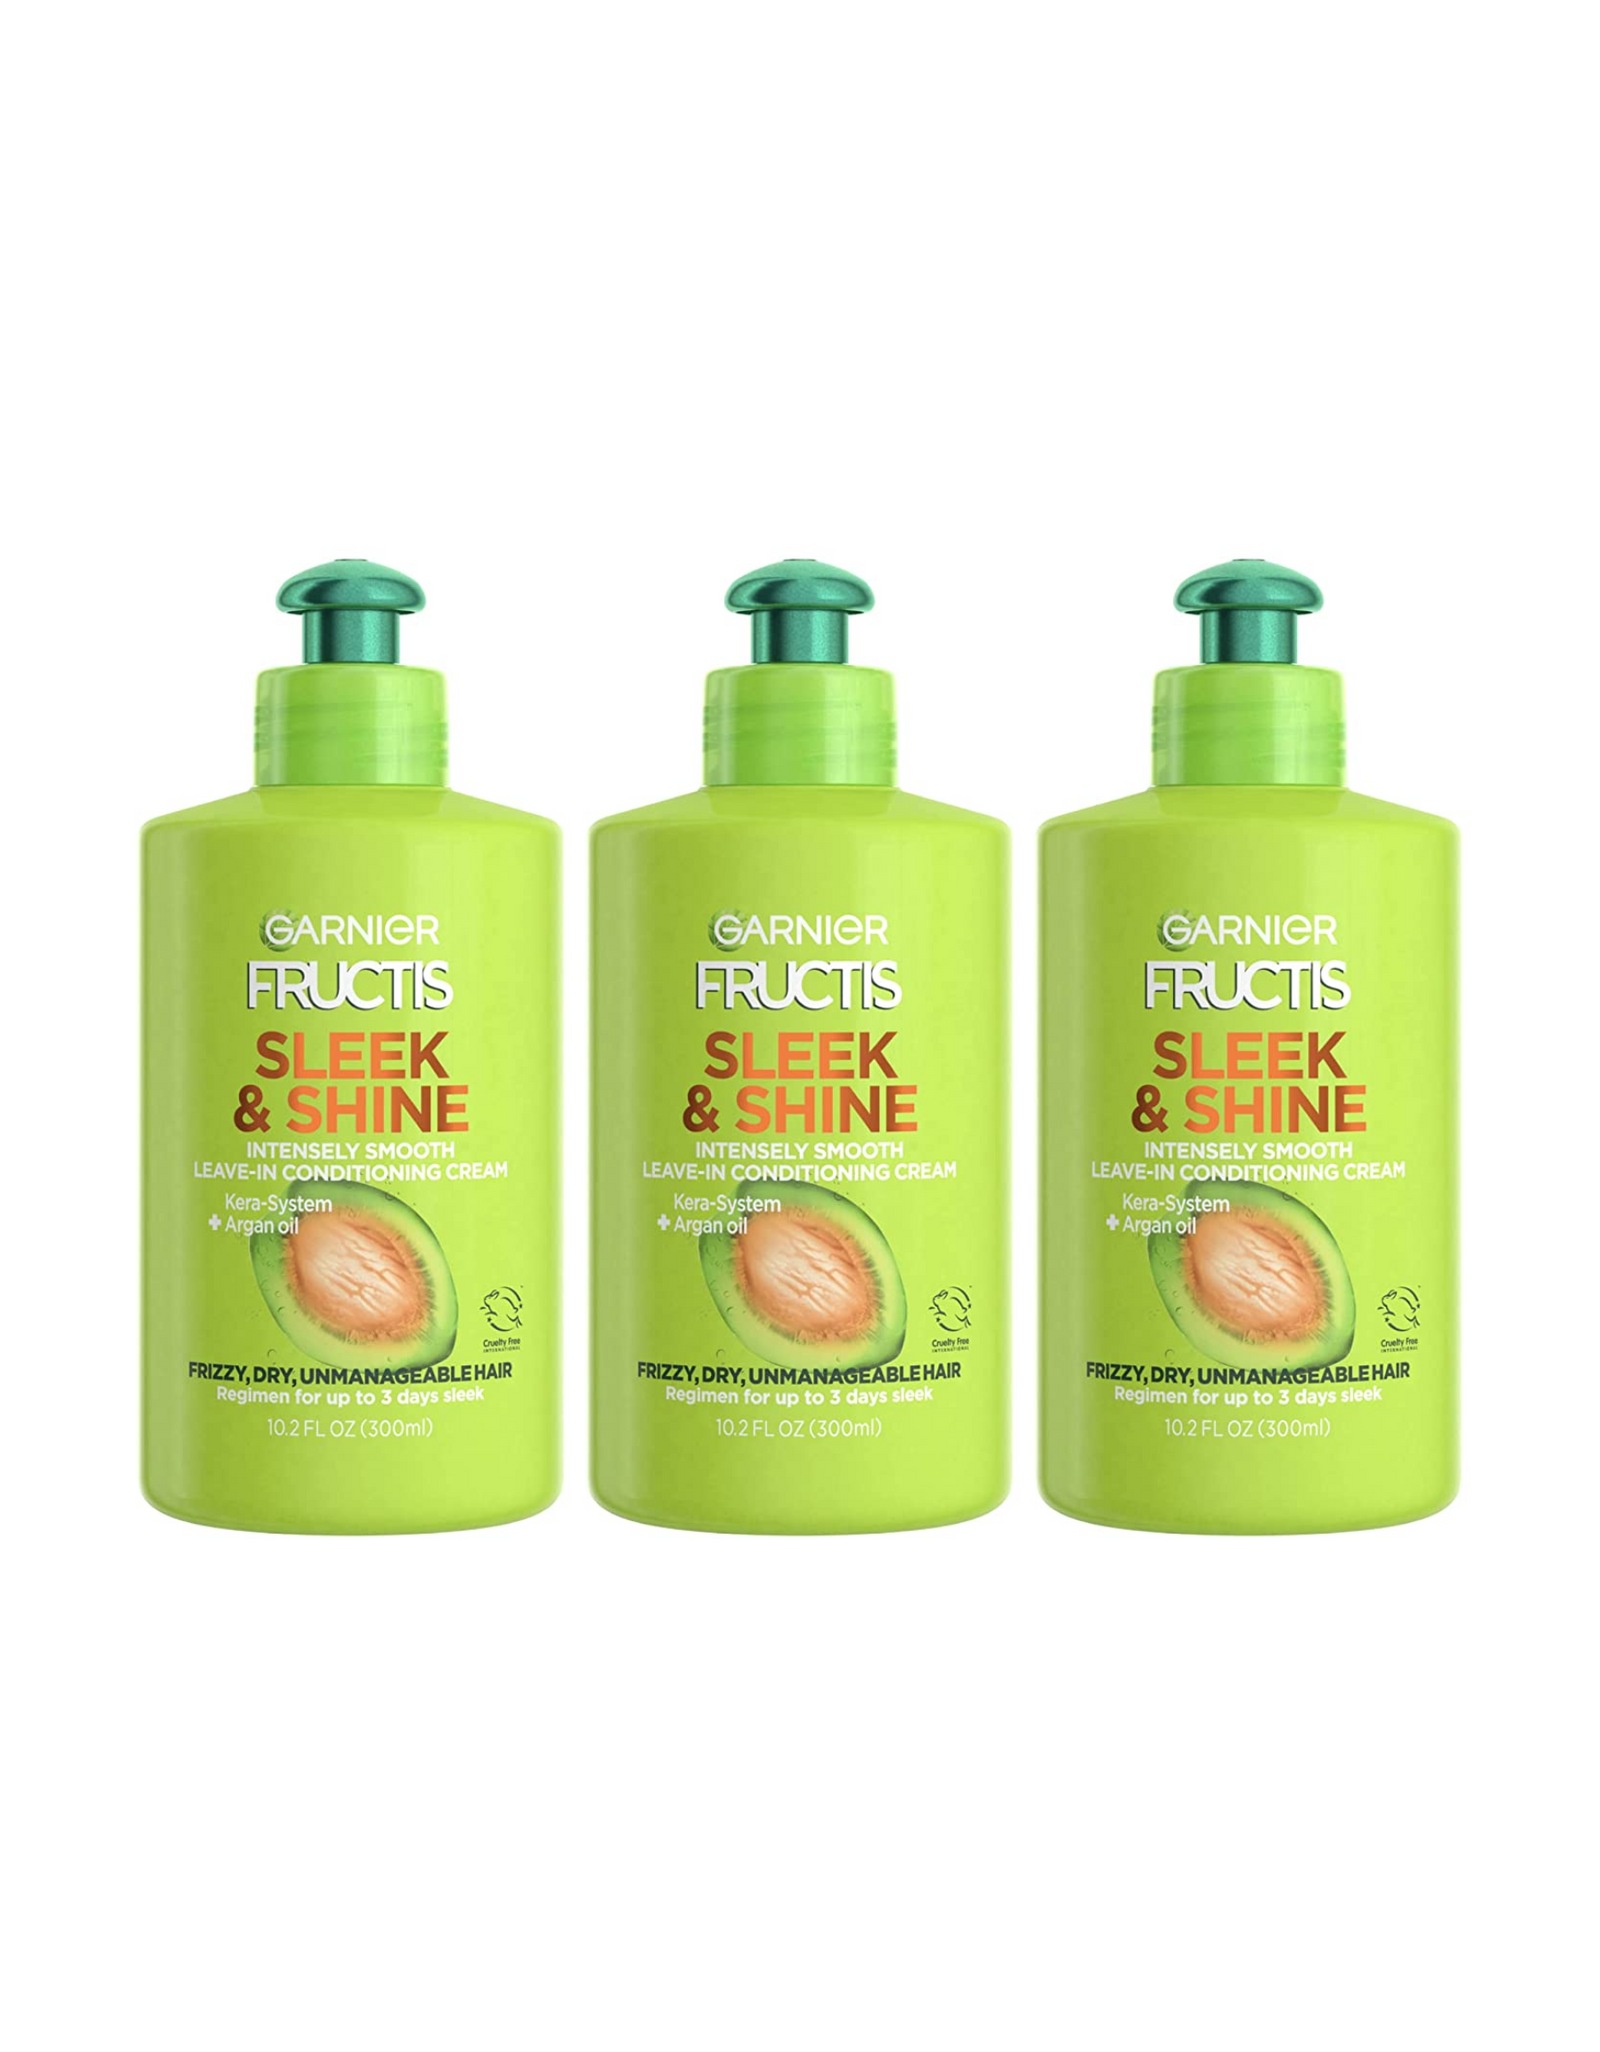 Garnier Fructis Sleek & Shine Intensely Smooth Leave-In Conditioning Cream, 10.2 Oz, 3 Ct (Packaging May Vary)